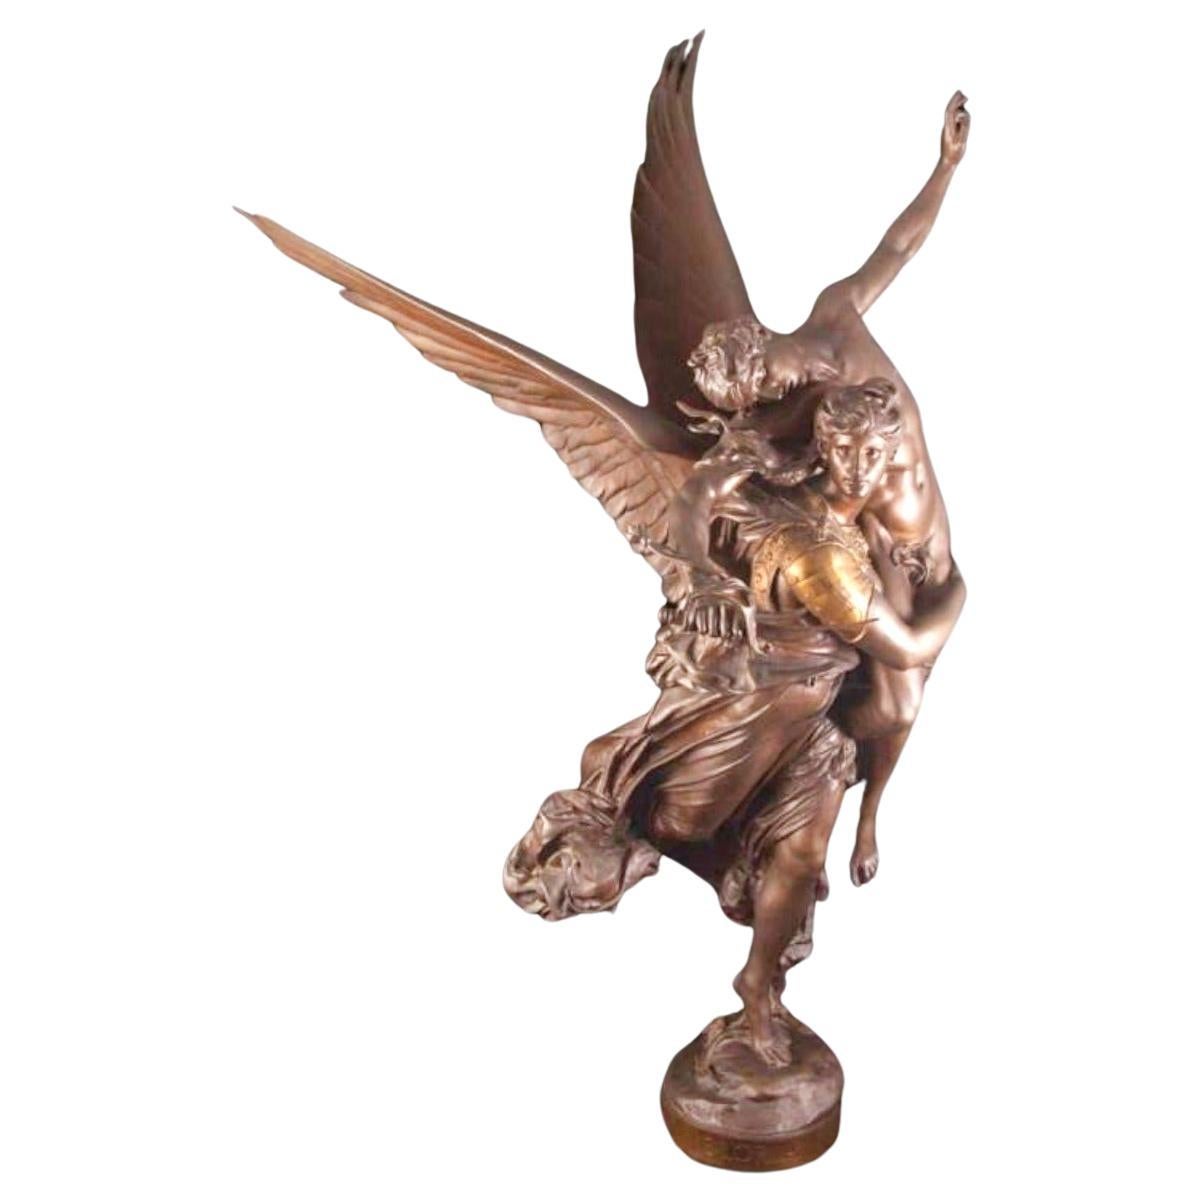 ‘Gloria Victis’, A Patinated Bronze Figural Group by Mercié, Cast by Barbedienne